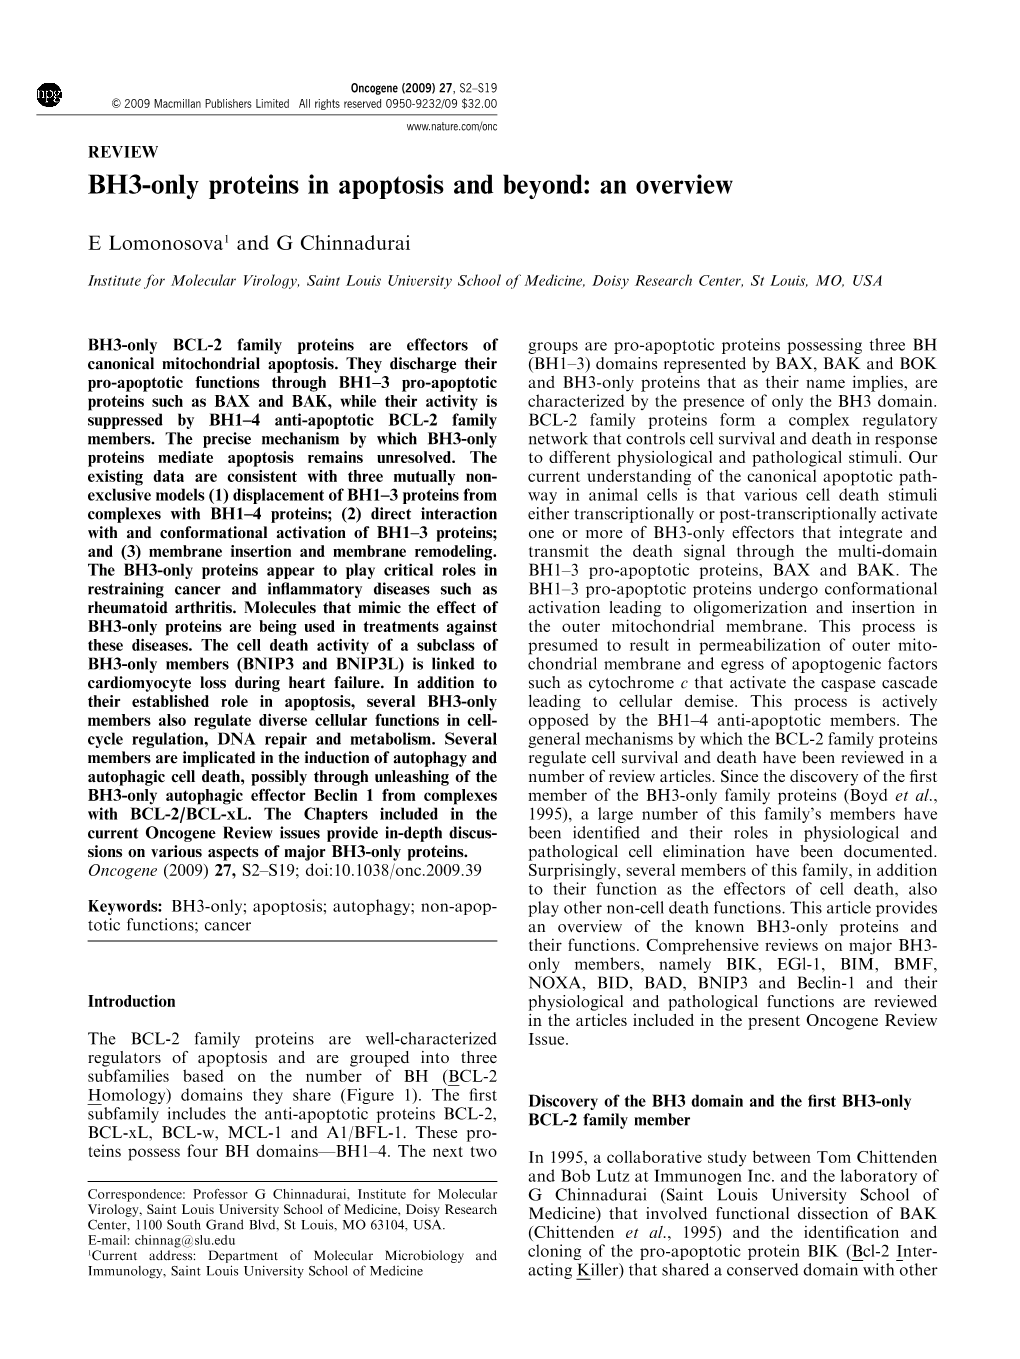 BH3-Only Proteins in Apoptosis and Beyond: an Overview